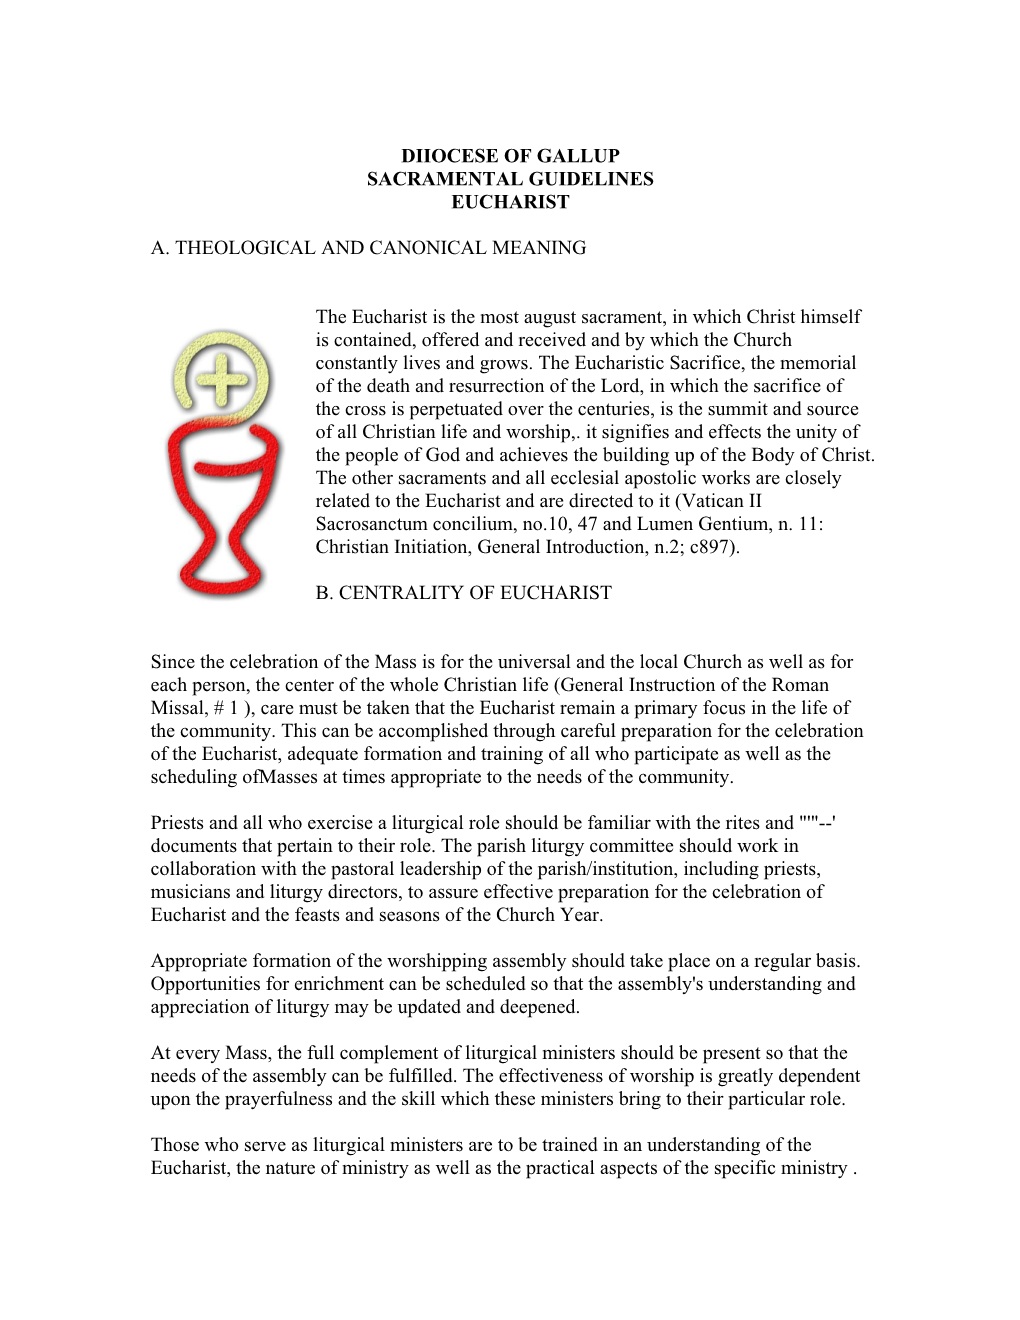 Diiocese of Gallup Sacramental Guidelines Eucharist